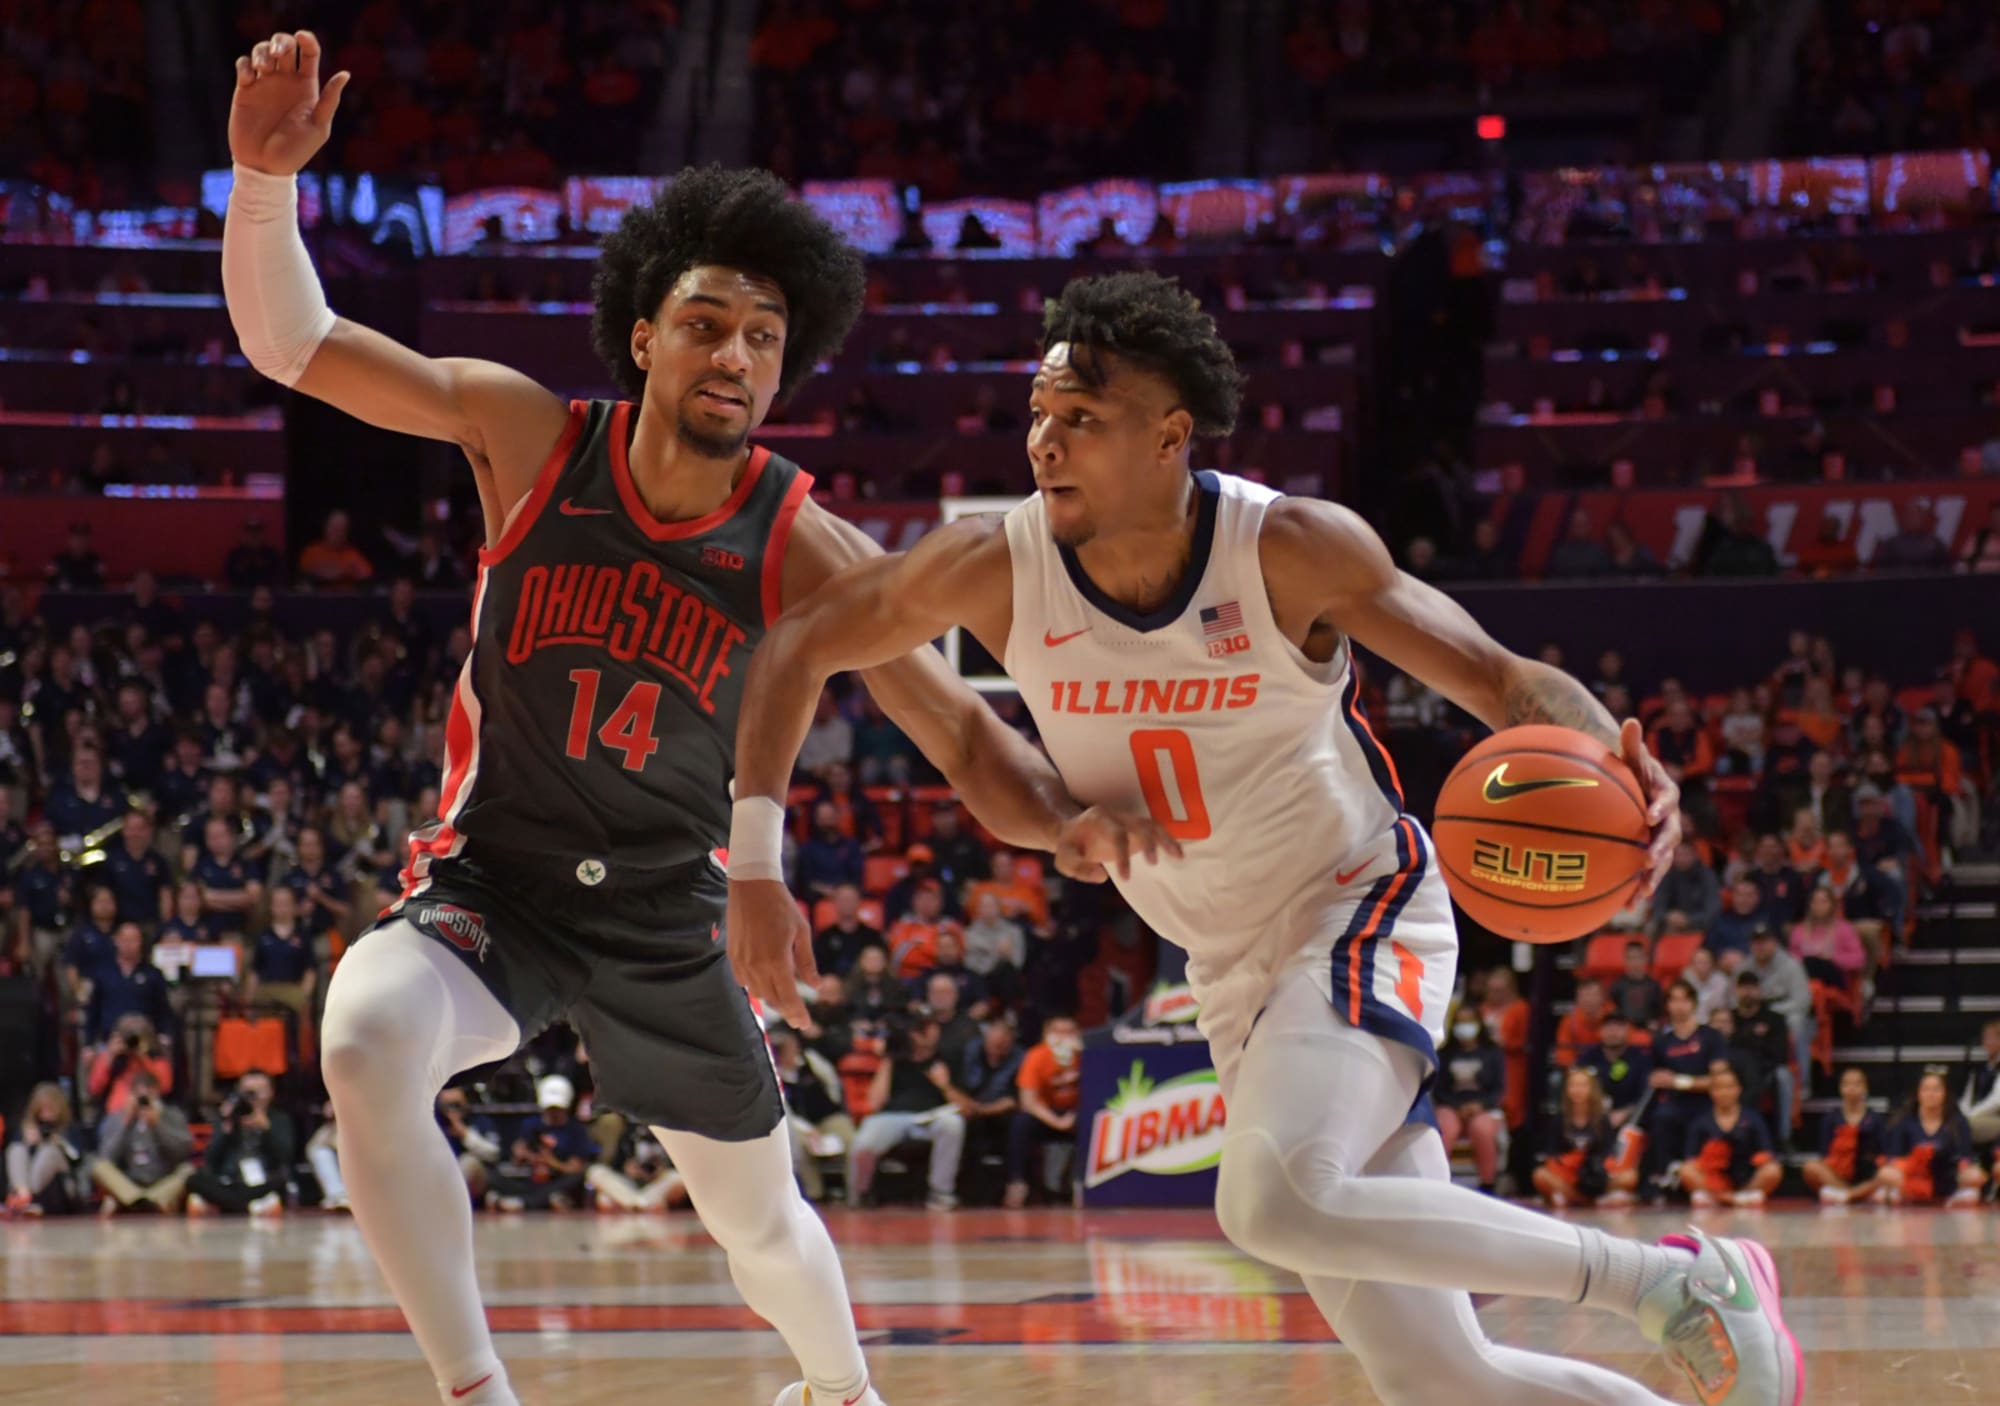 Ohio State basketball: Offense fails once again in loss to Illinois